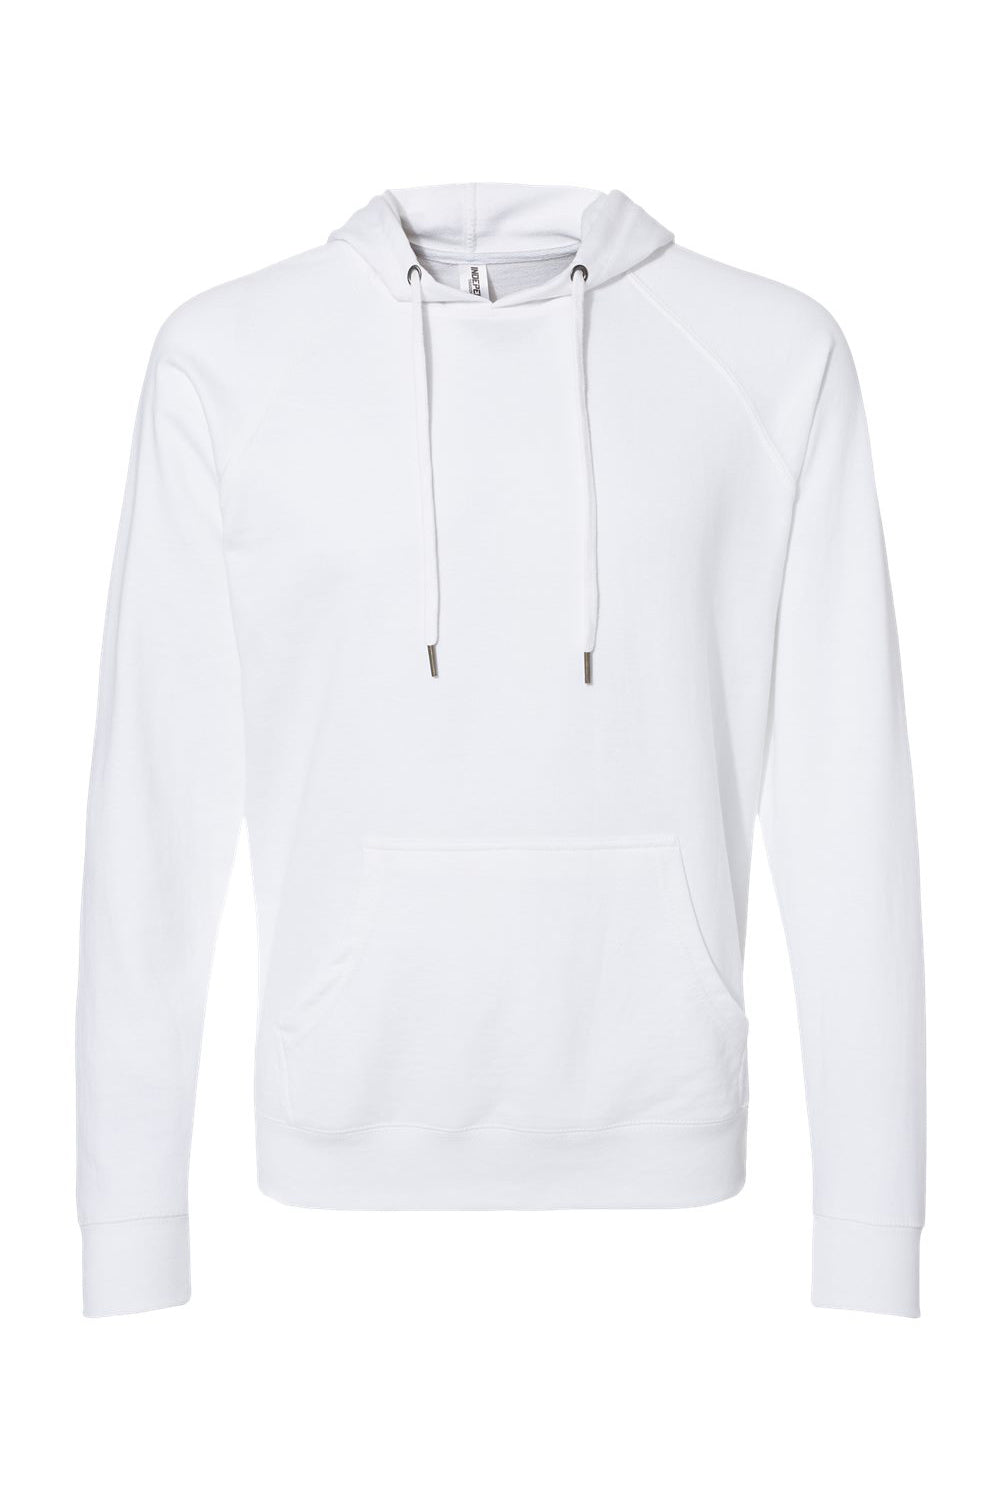 Independent Trading Co. SS1000 Mens Icon Loopback Terry Hooded Sweatshirt Hoodie White Flat Front